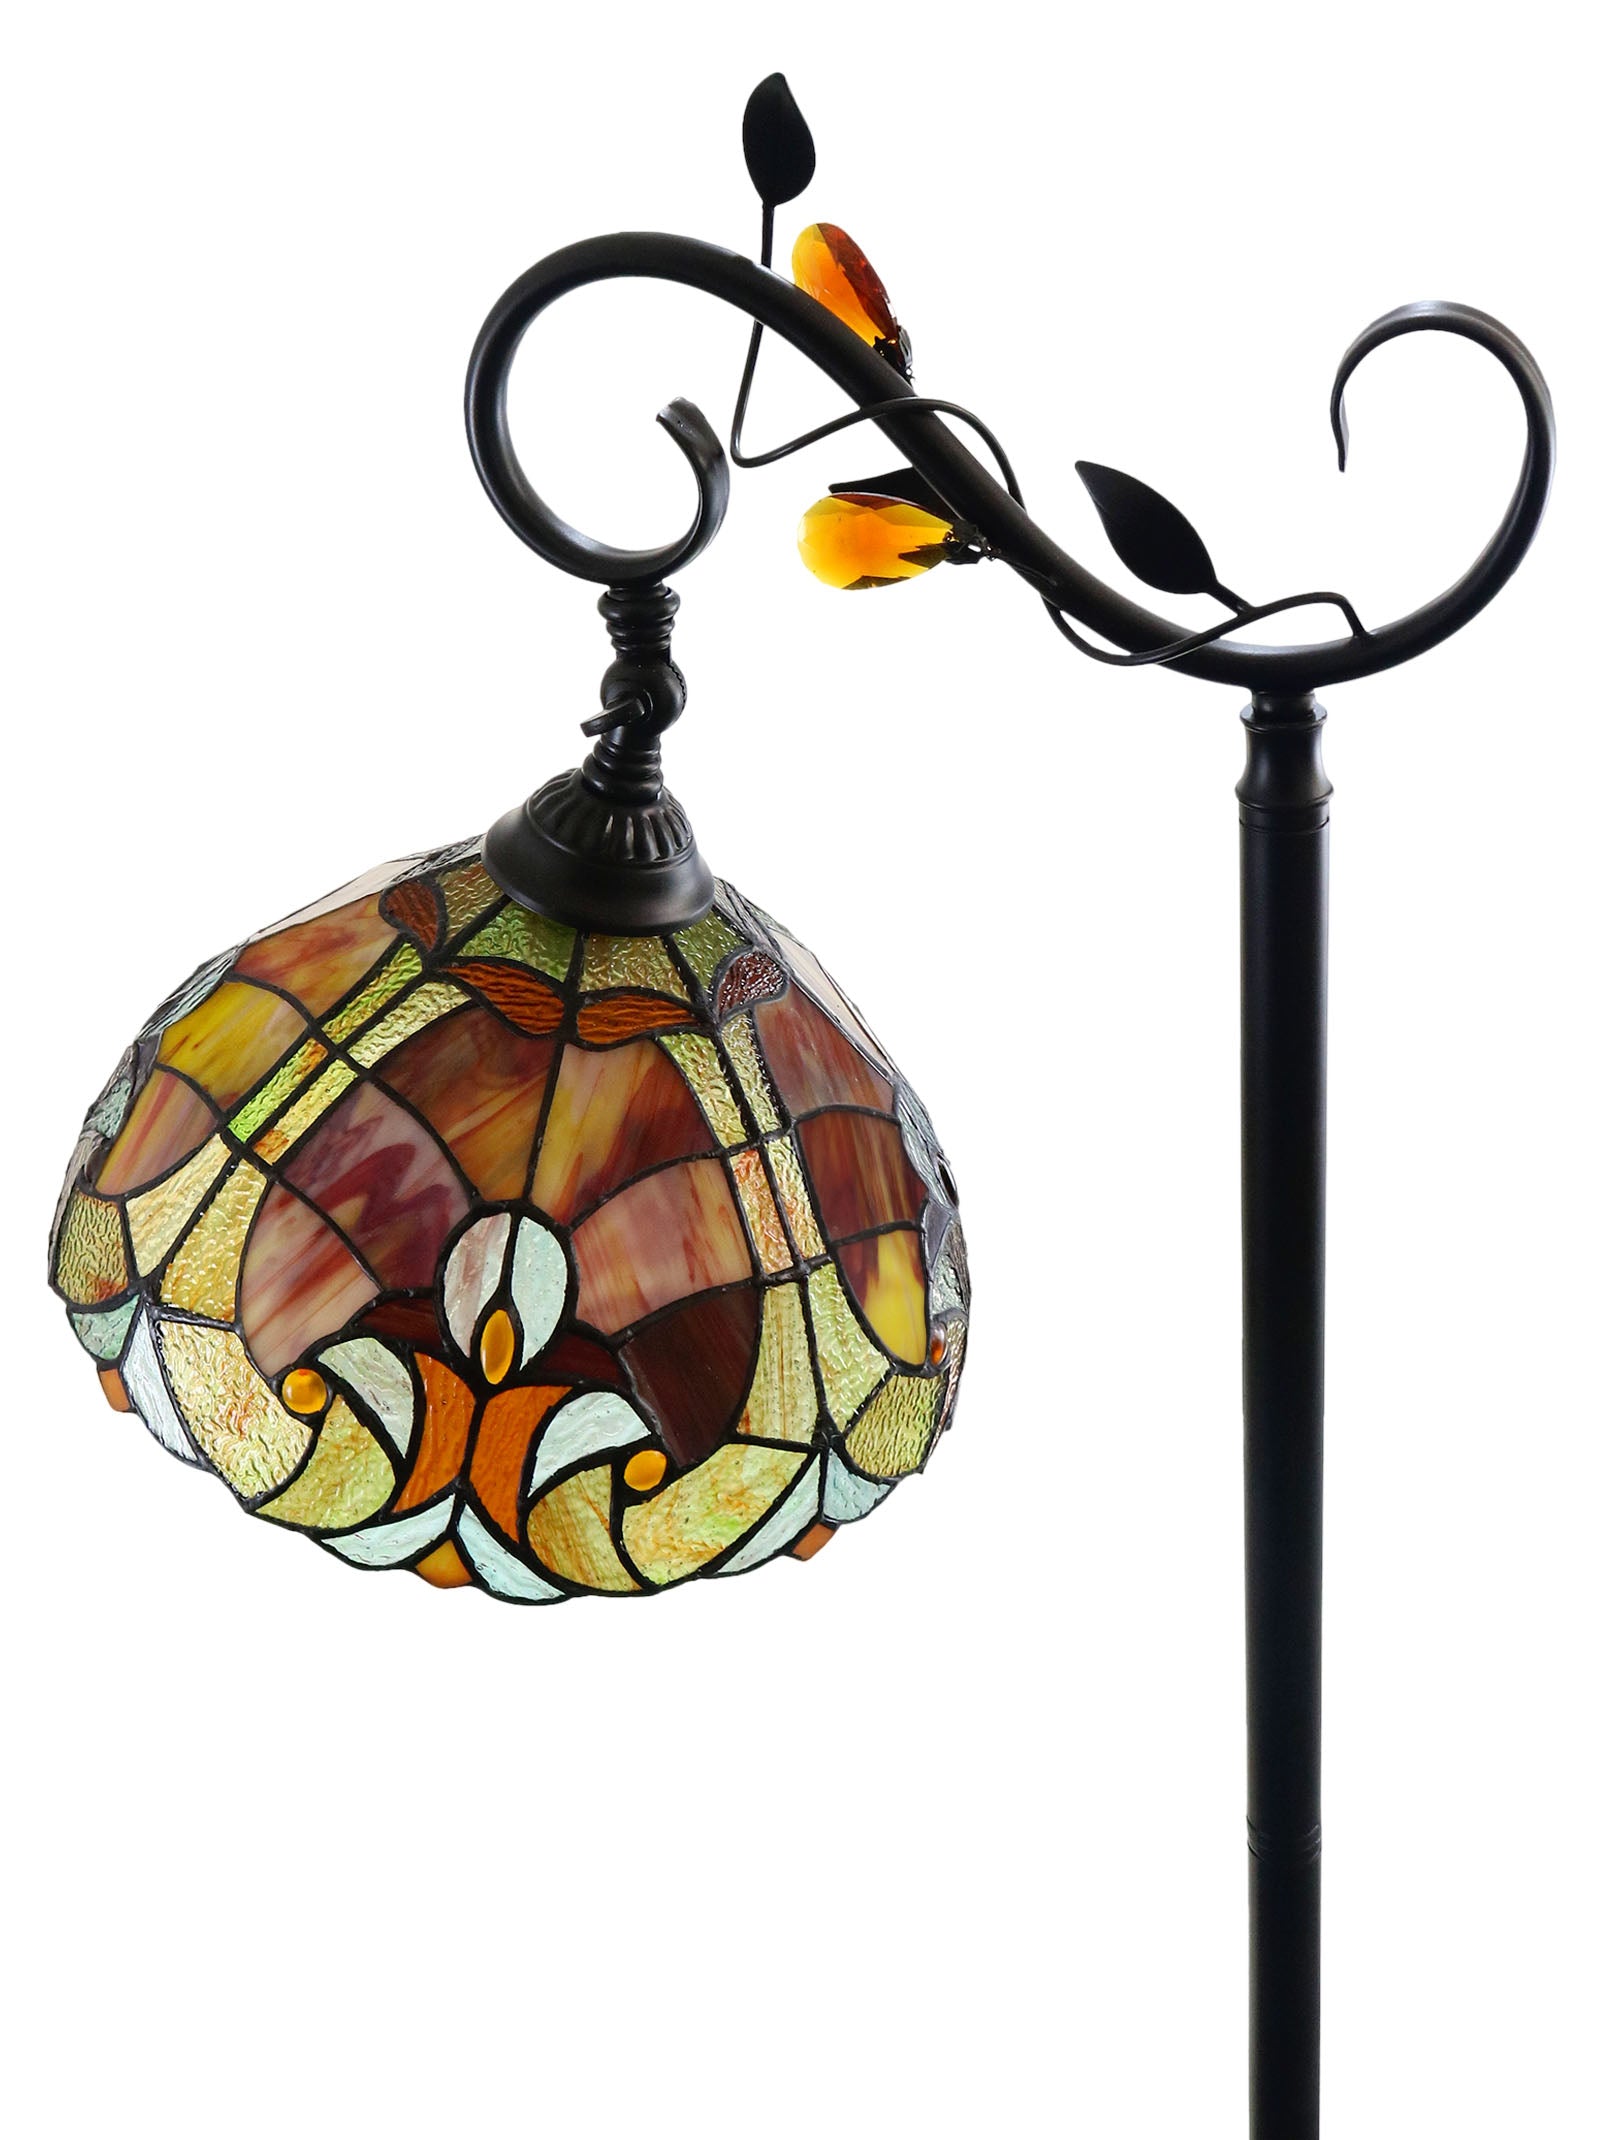 Antique Style Red Amor Tiffany Stained Glass Edwardian Bridge Arm Tiffany Floor Lamp